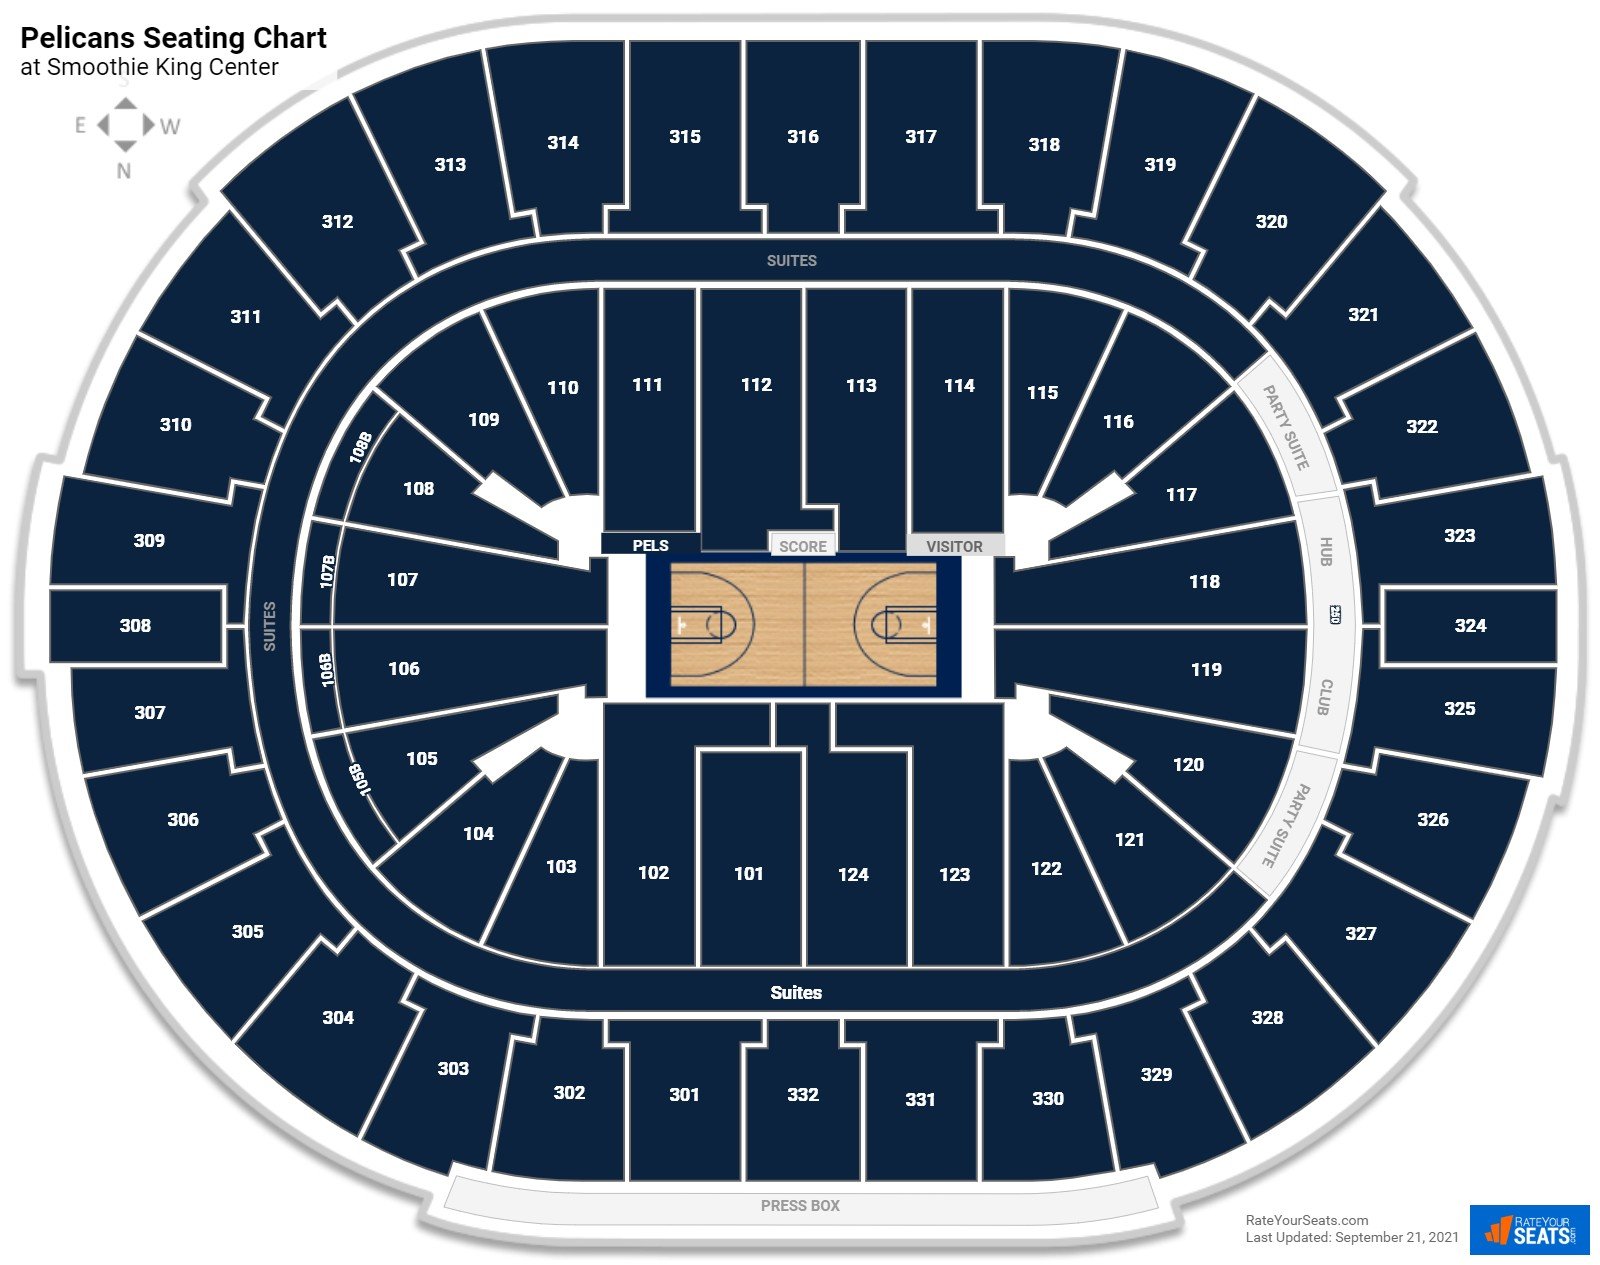 New Orleans Pelicans Seating Chart at Smoothie King Center